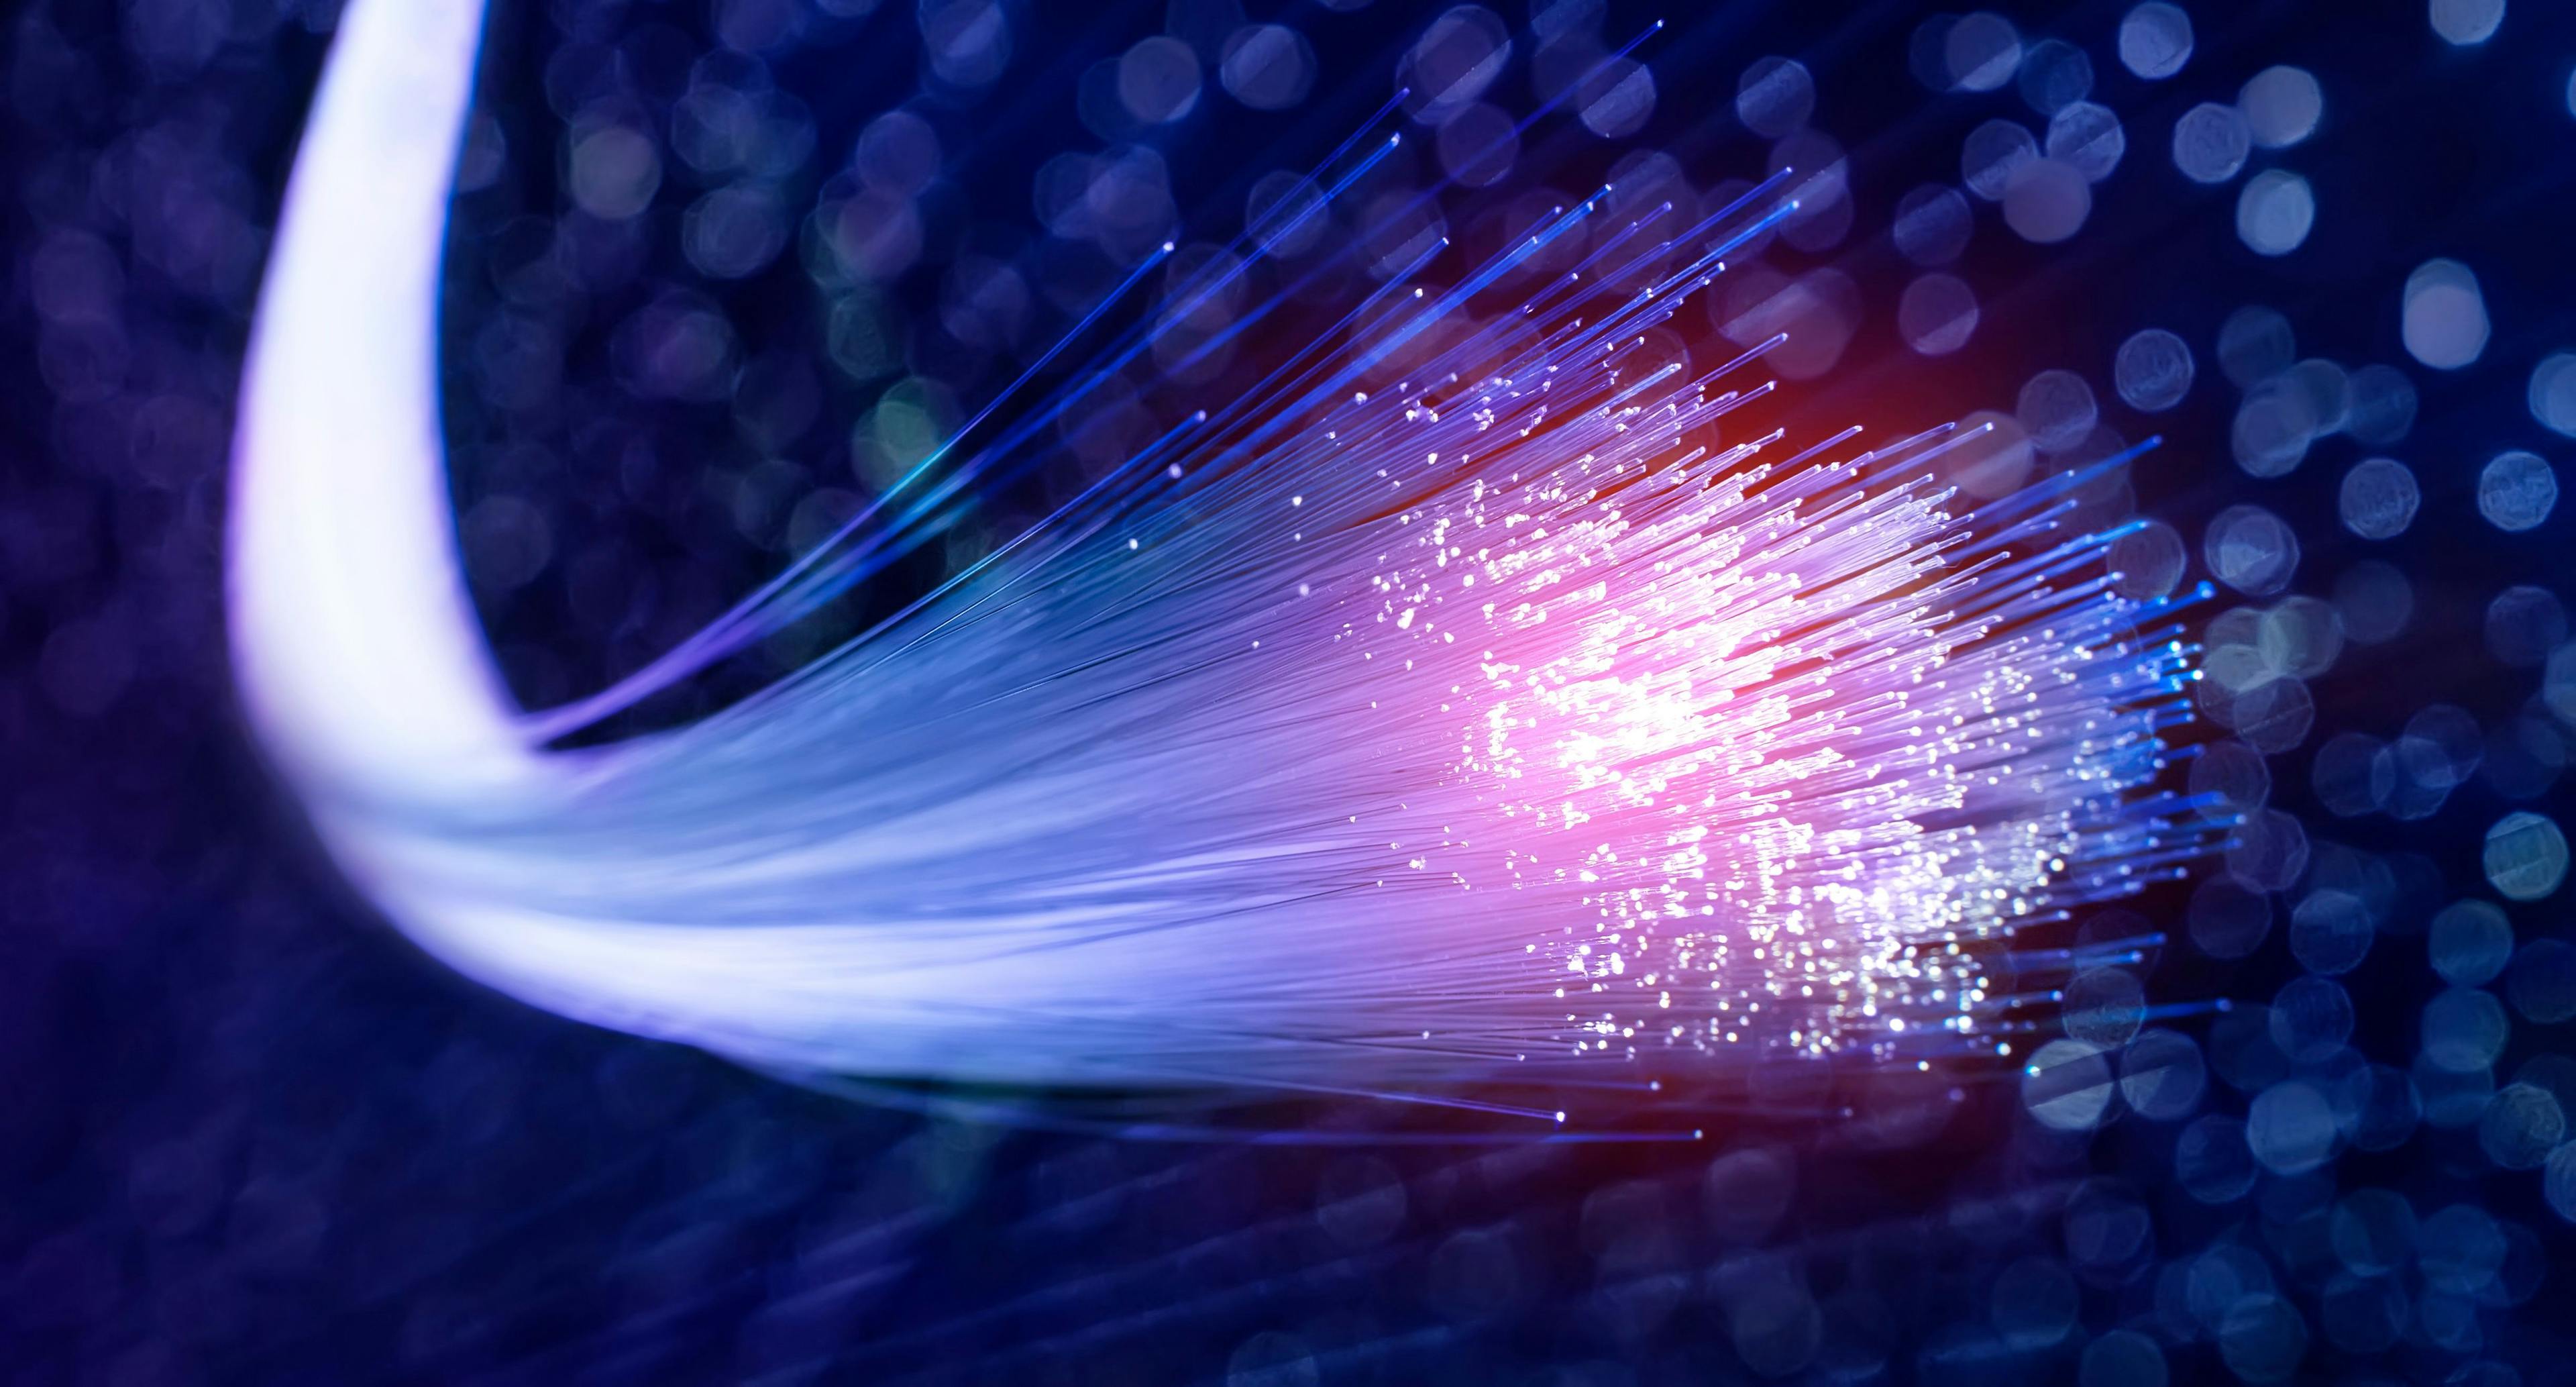 optical fibres dynamic flying from deep on technology background | Image Credit: © xiaoliangge - stock.adobe.com